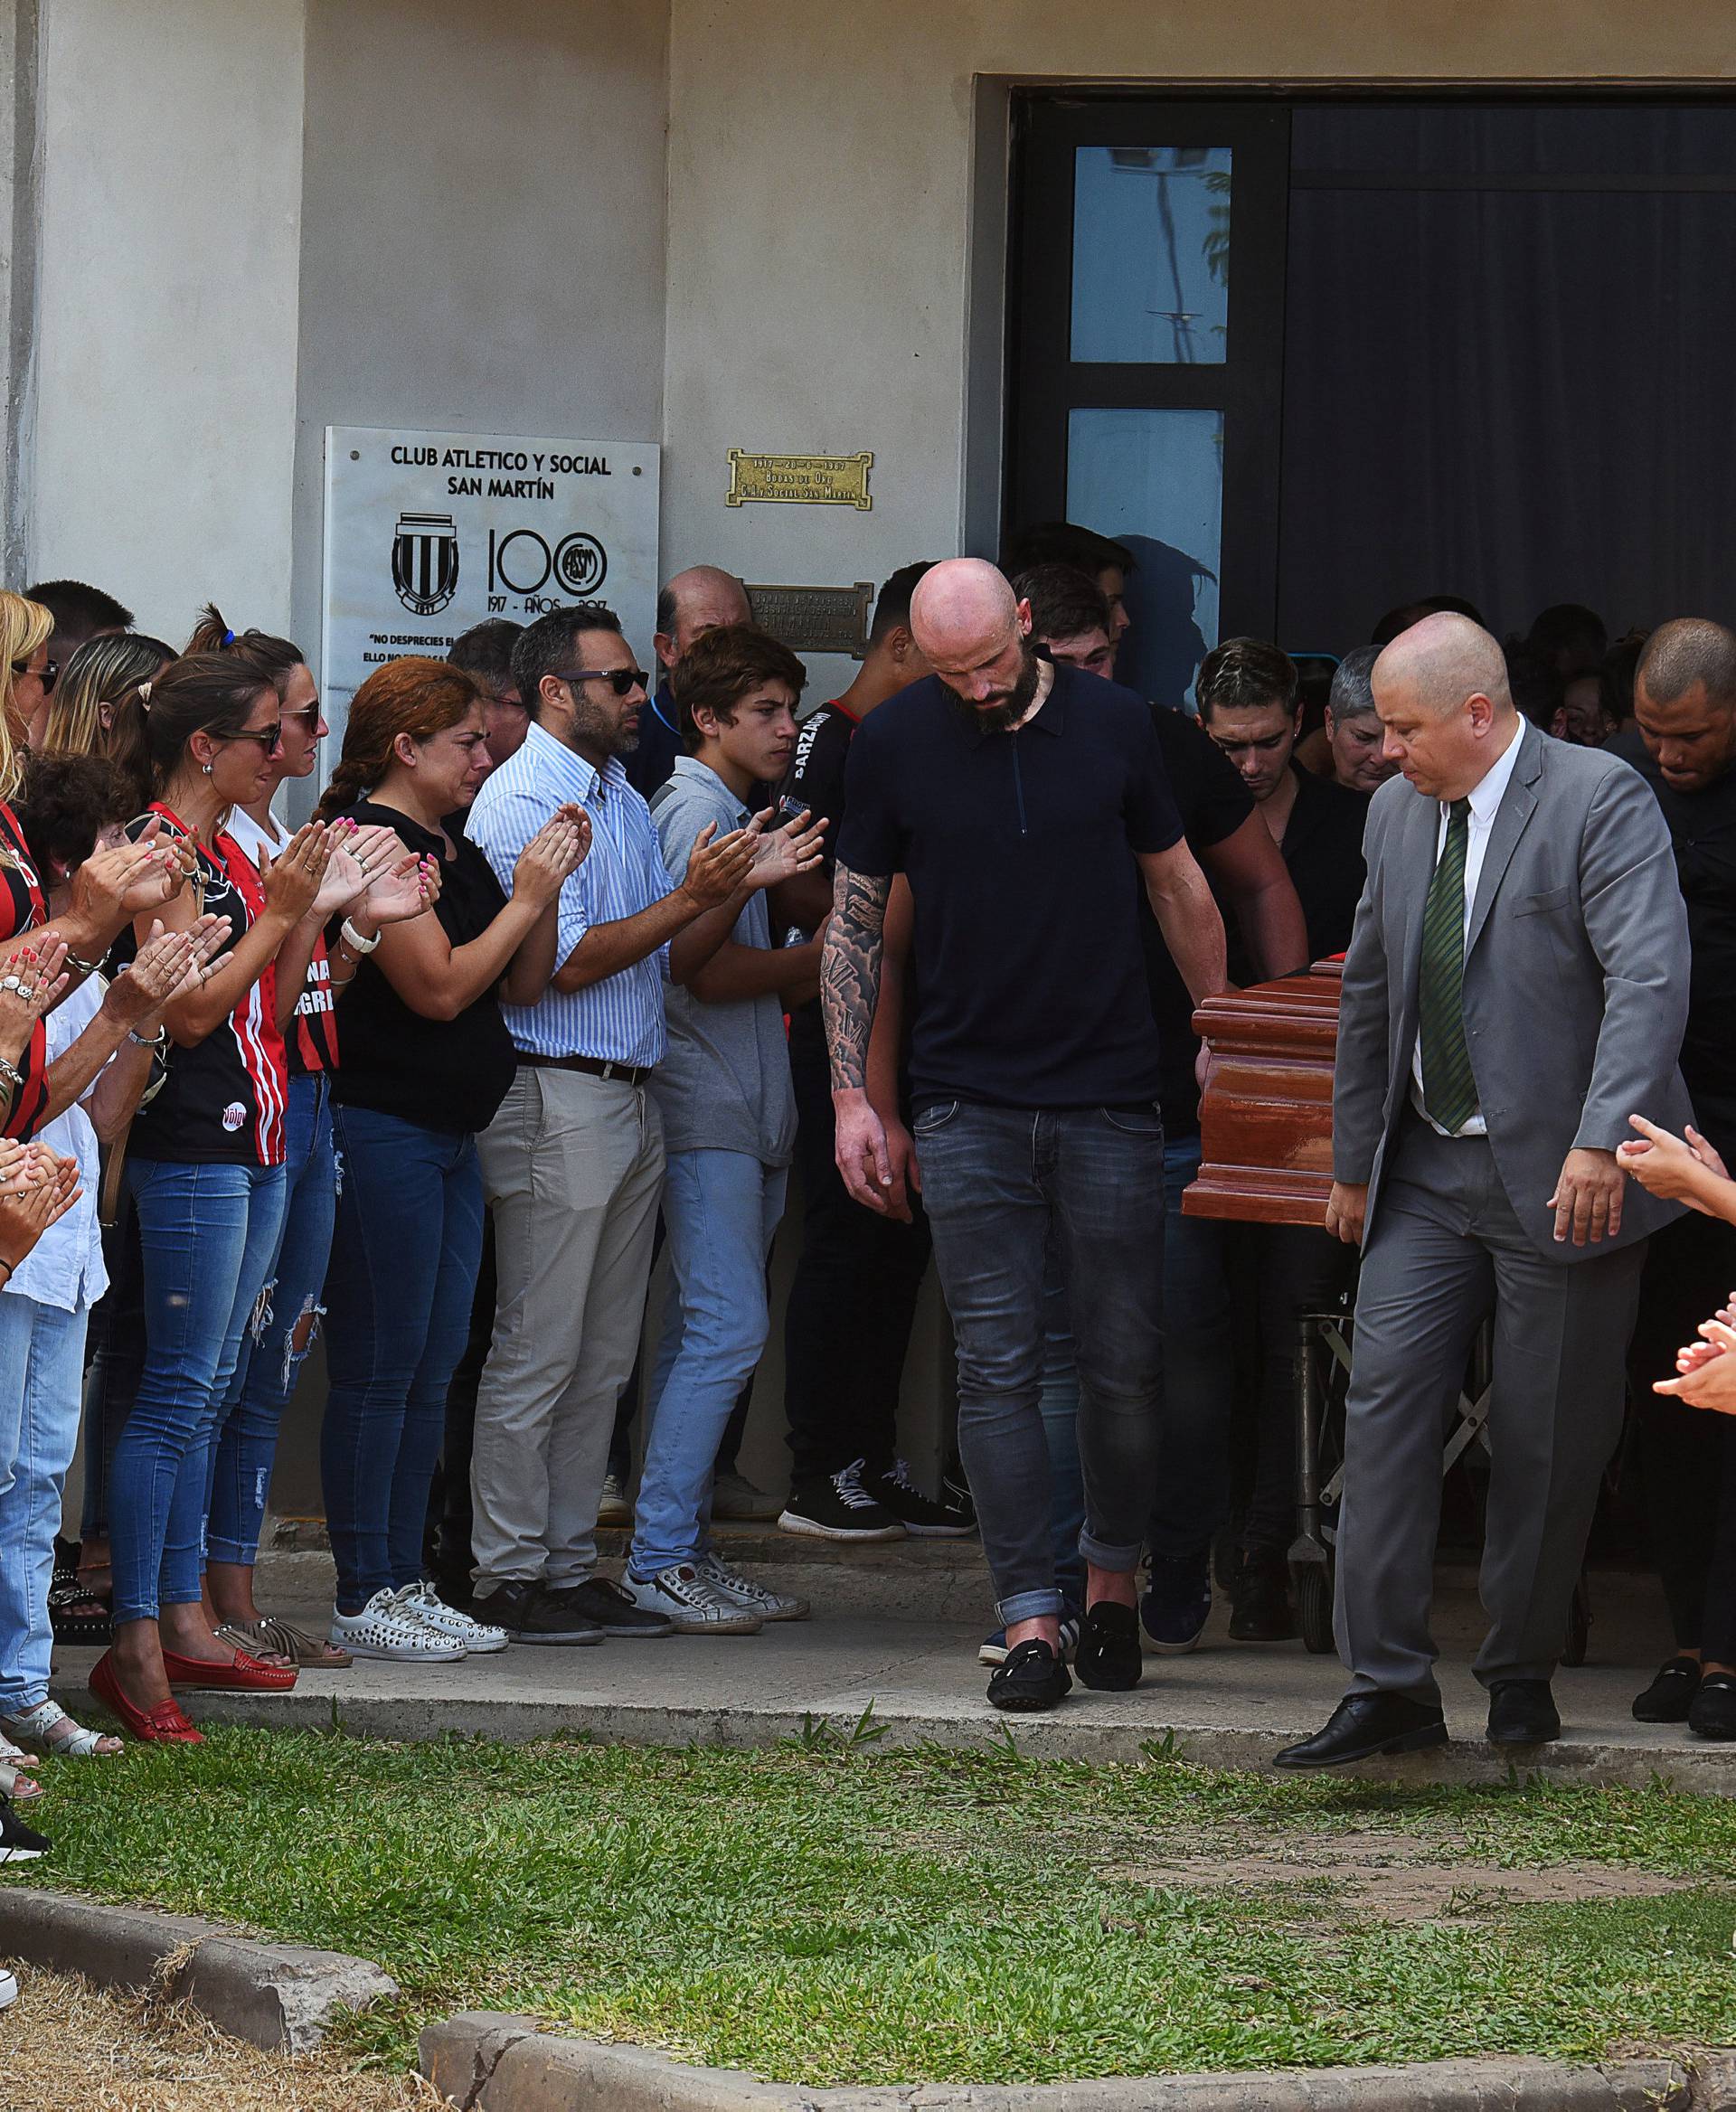 Family and friends carry the coffin of Emiliano Sala, soccer player who died in a plane crash in the English Channel, while a crowd attends his wake in Progreso